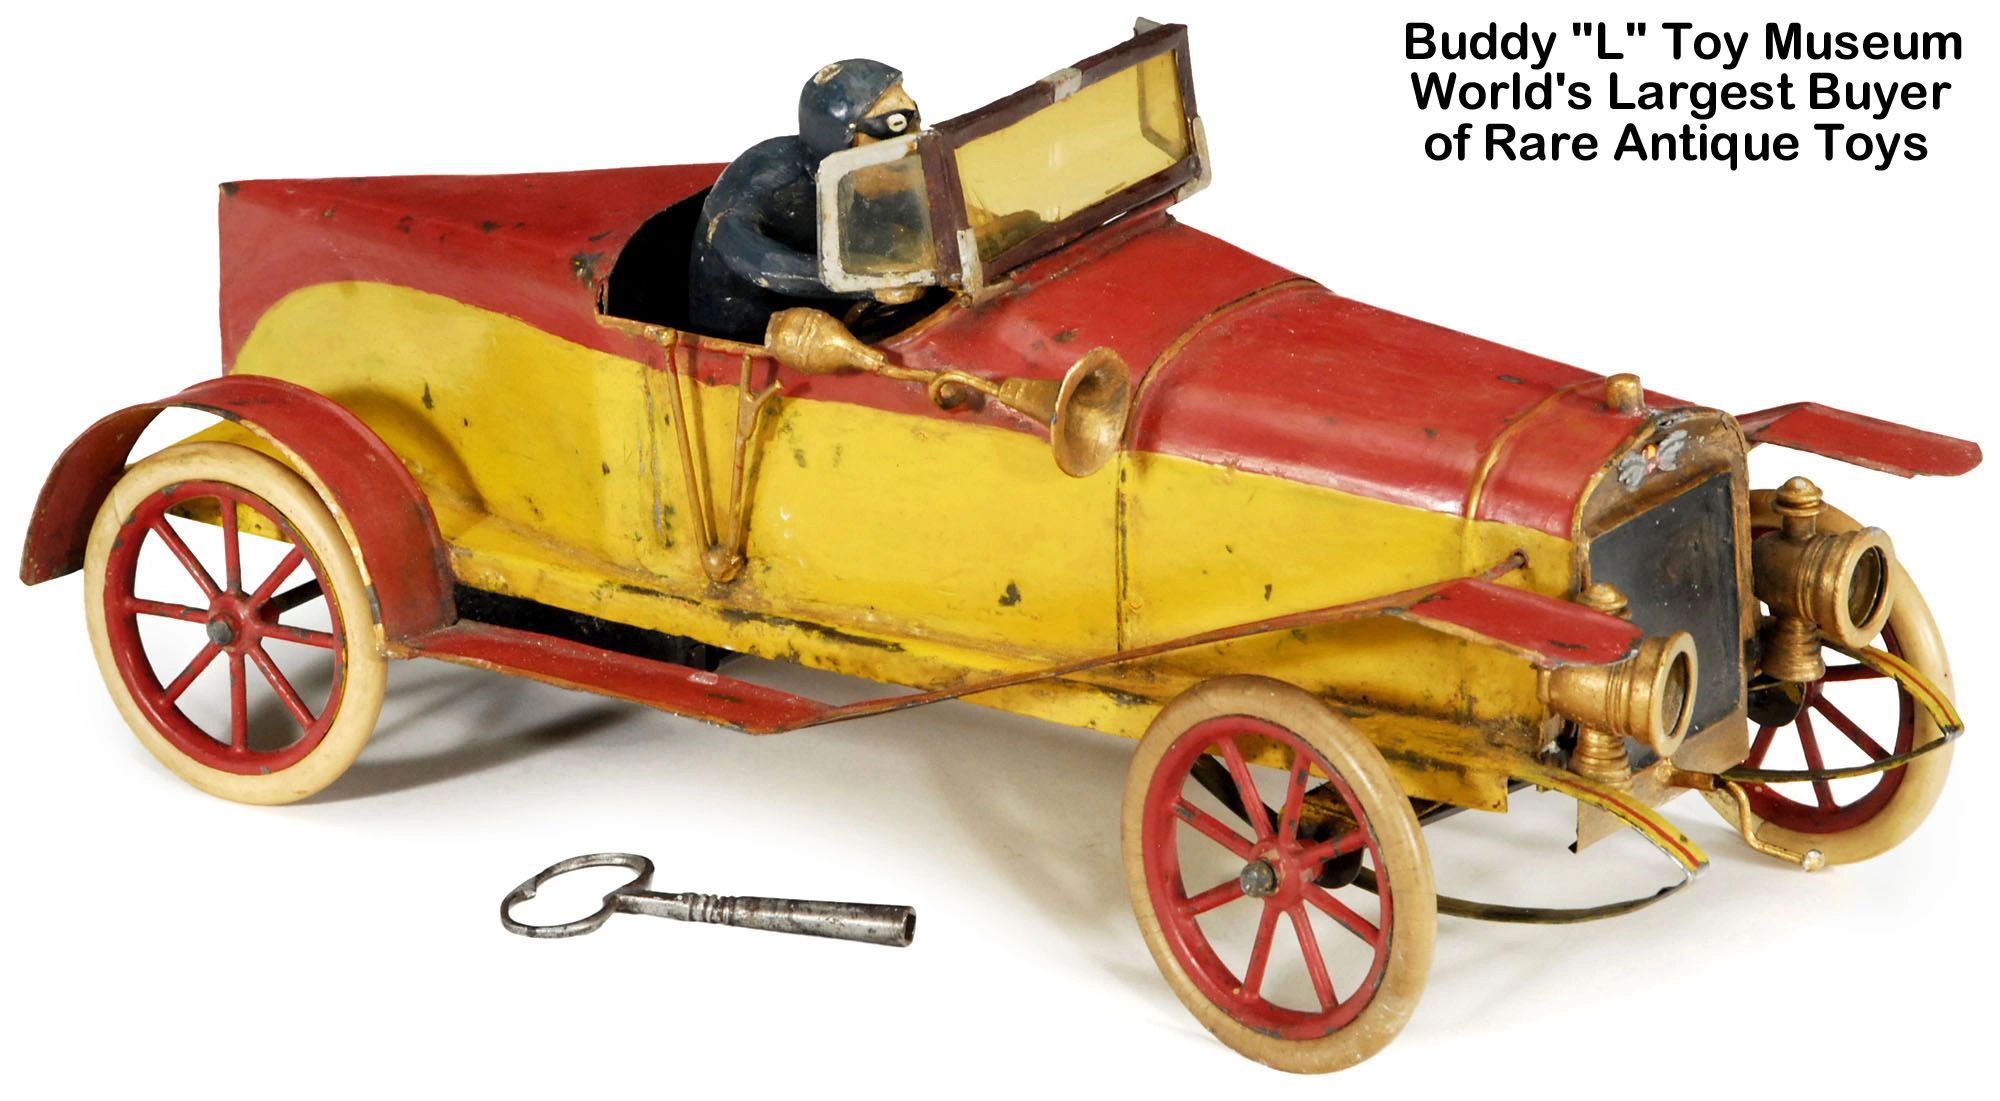 buddy l toys for sale,vintage tin toys information,toy appraisal,buying toy collections,antique toy 